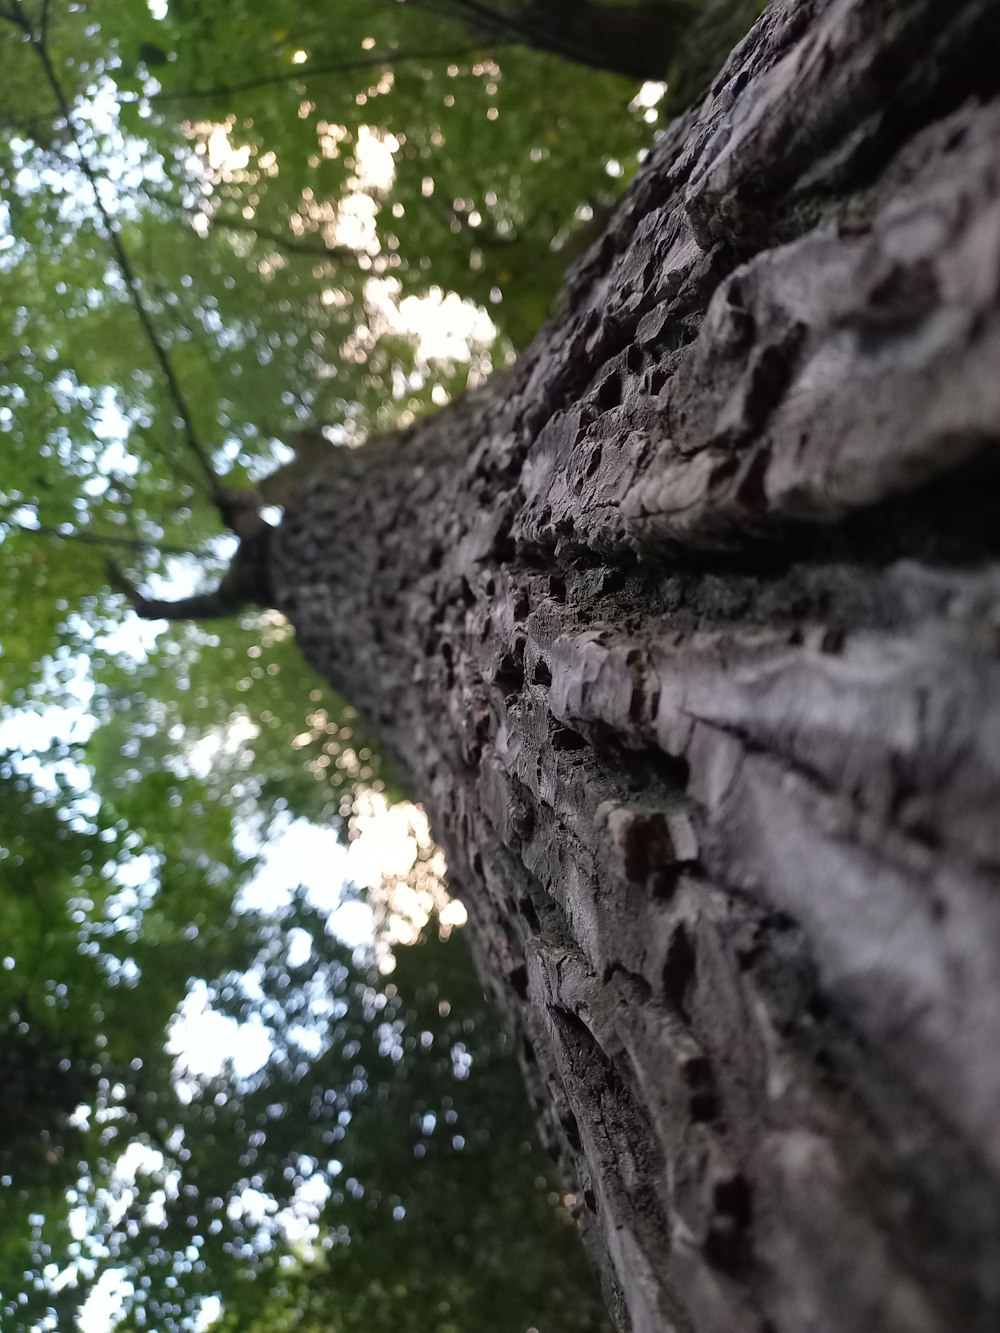 looking up at the bark of a tree in a forest